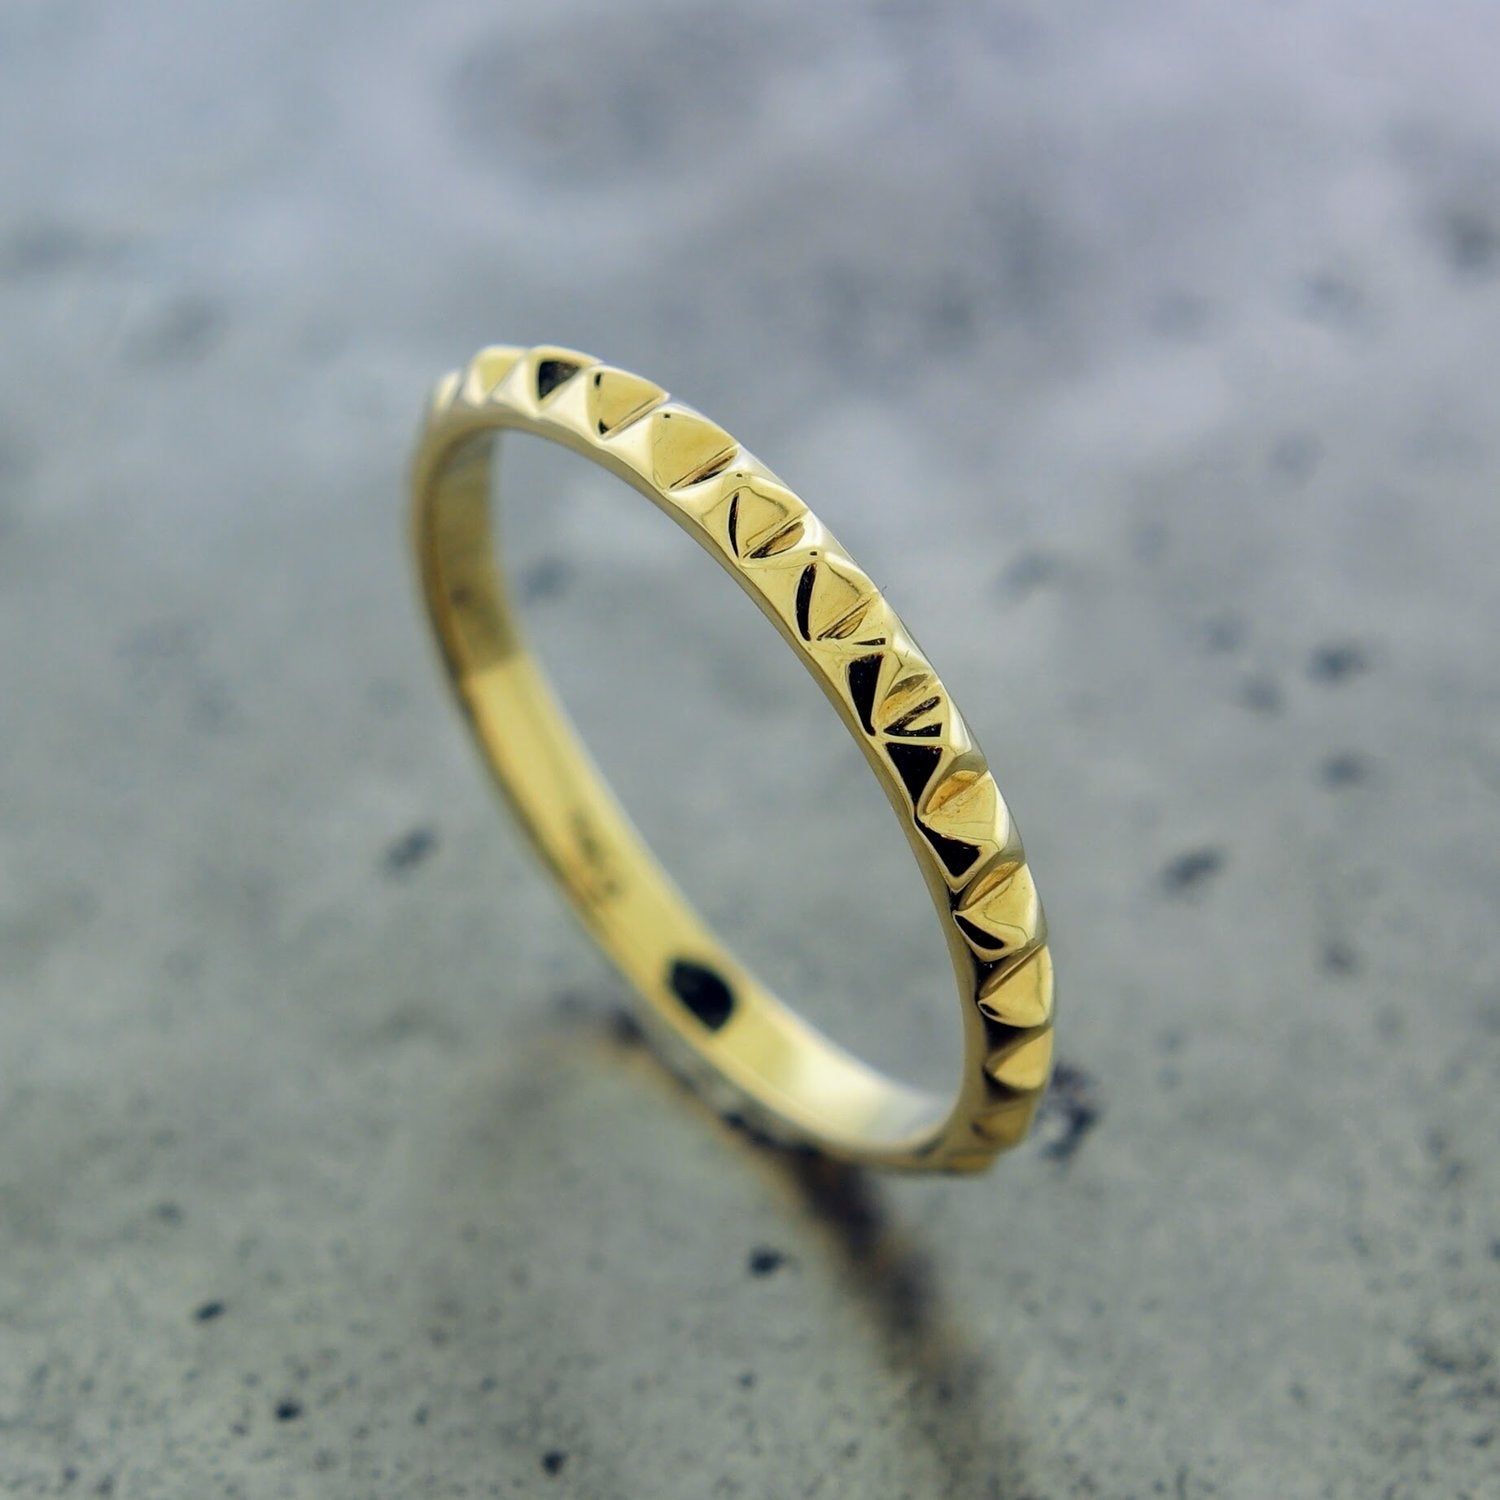 Angled aerial view of 14 karat yellow textured ring. Here you can see the ring features a square pyramid motif. The ring showcases one row of square pyramids that encircle the entirety of the band.